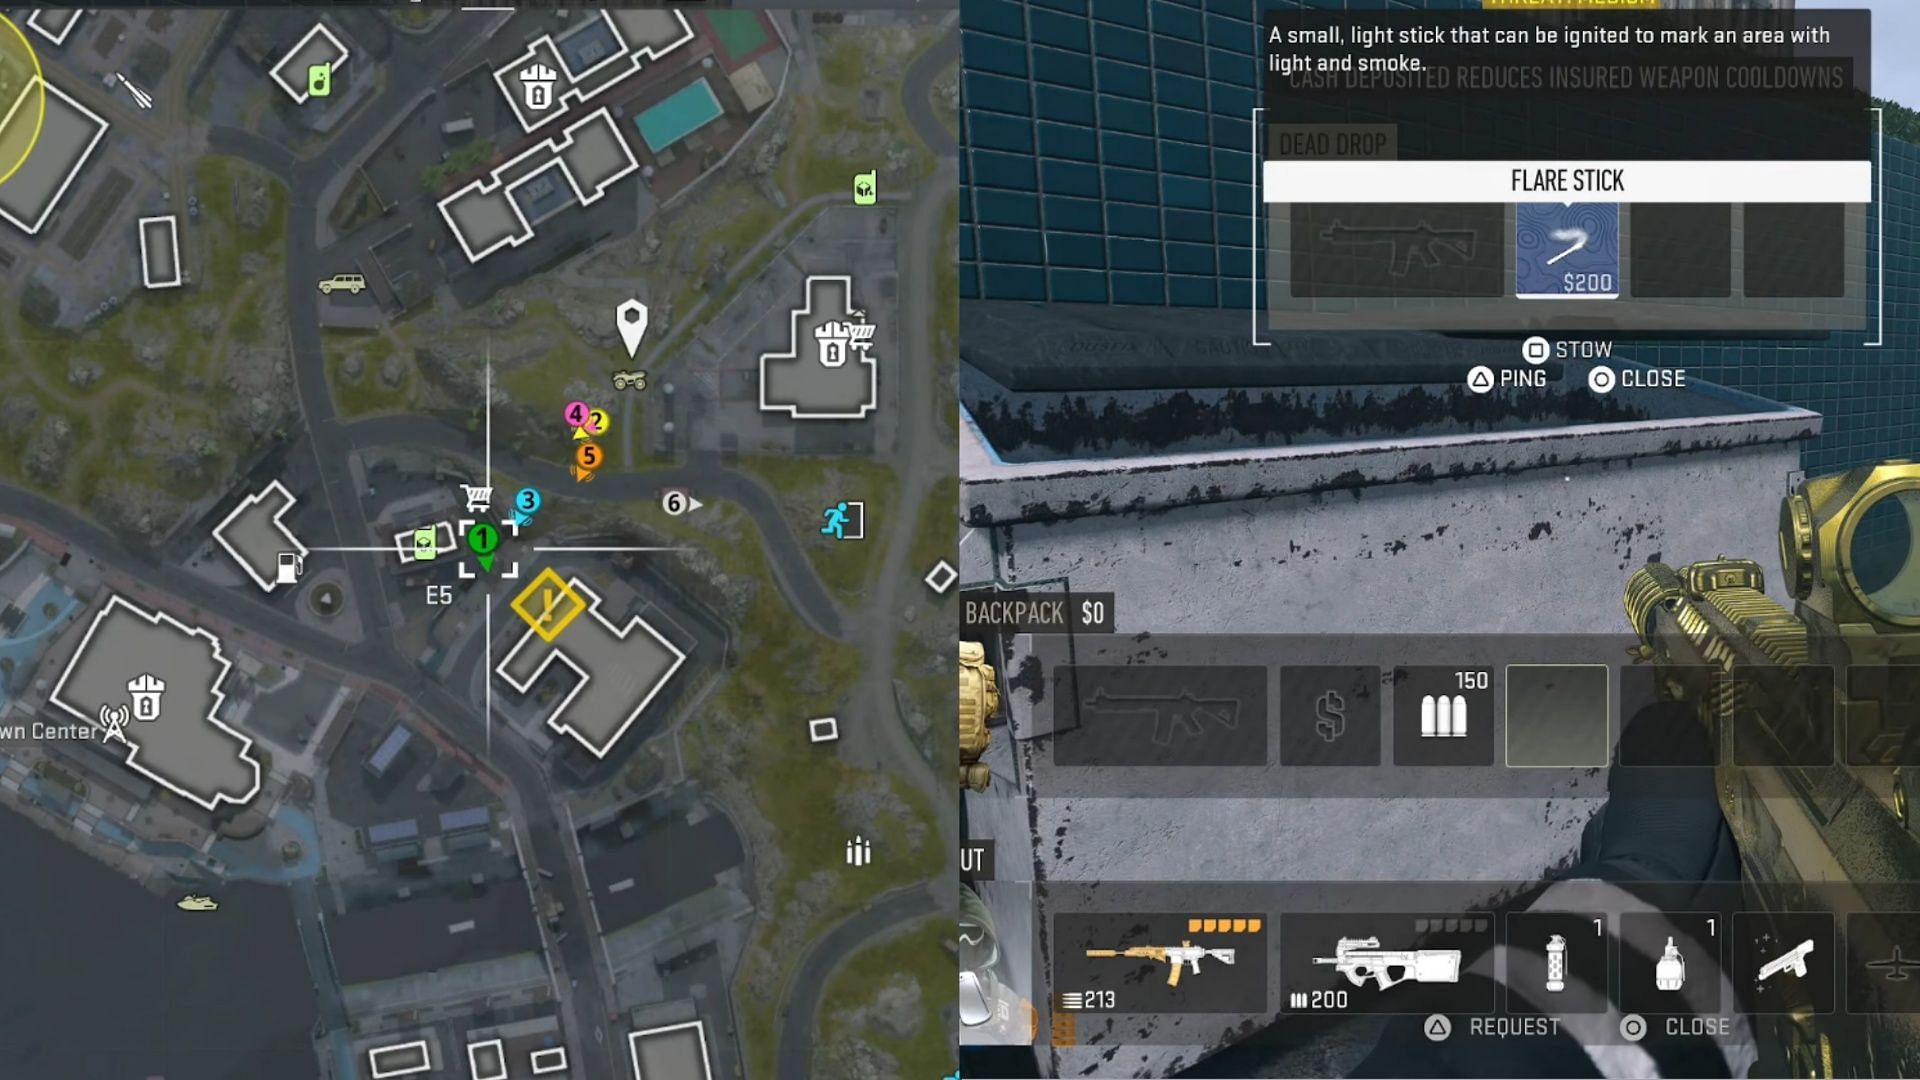 Location of the dead drop to pick up the flare sticks (Image via YouTube/Errl Shatter)